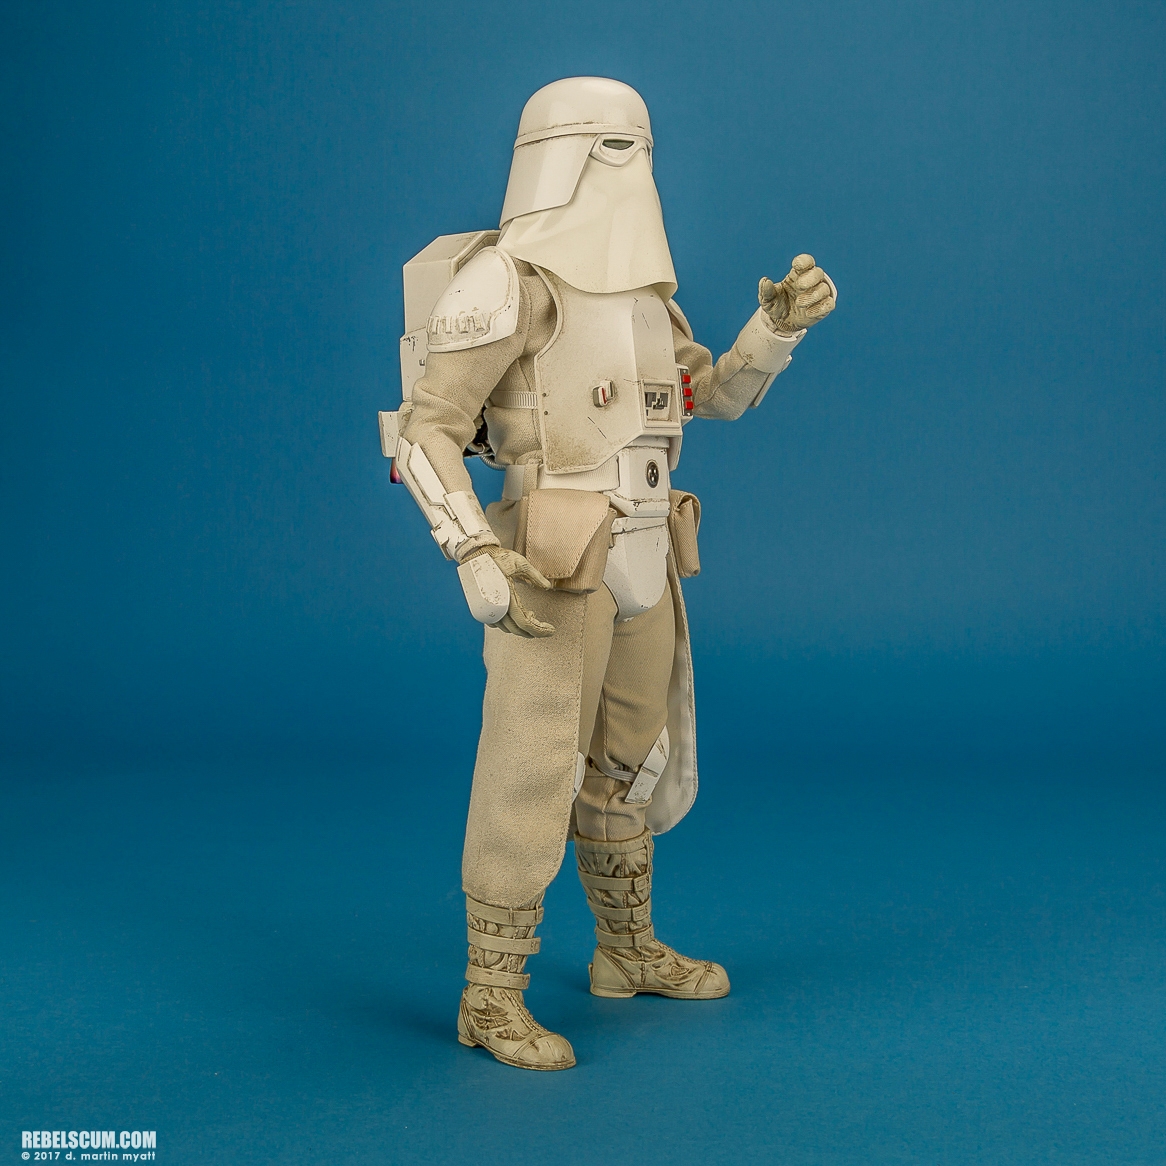 VGM25-Snowtroopers-Two-Pack-Hot-Toys-006.jpg